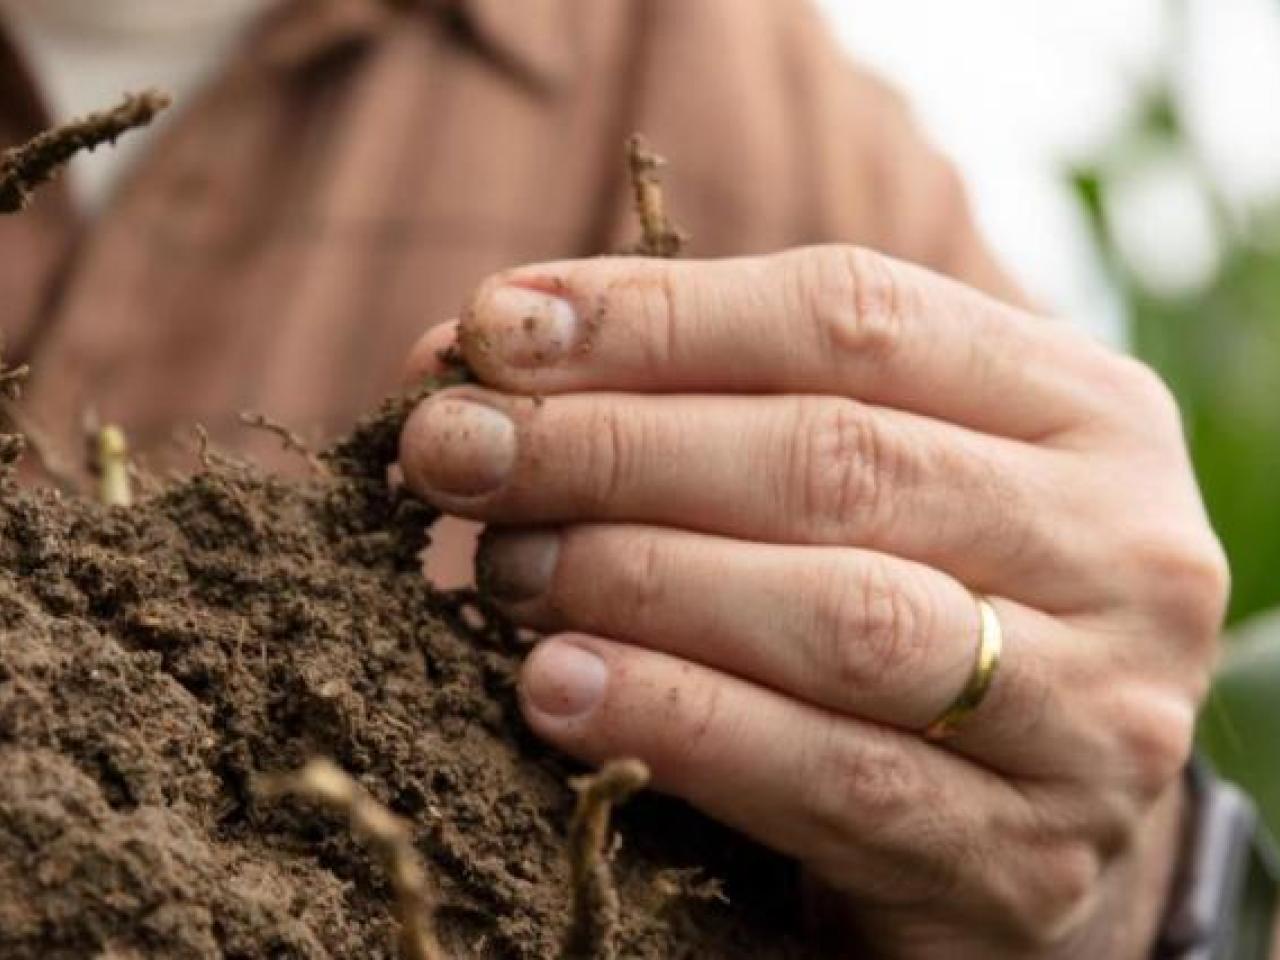 farmer examining roots in a mound of dirt